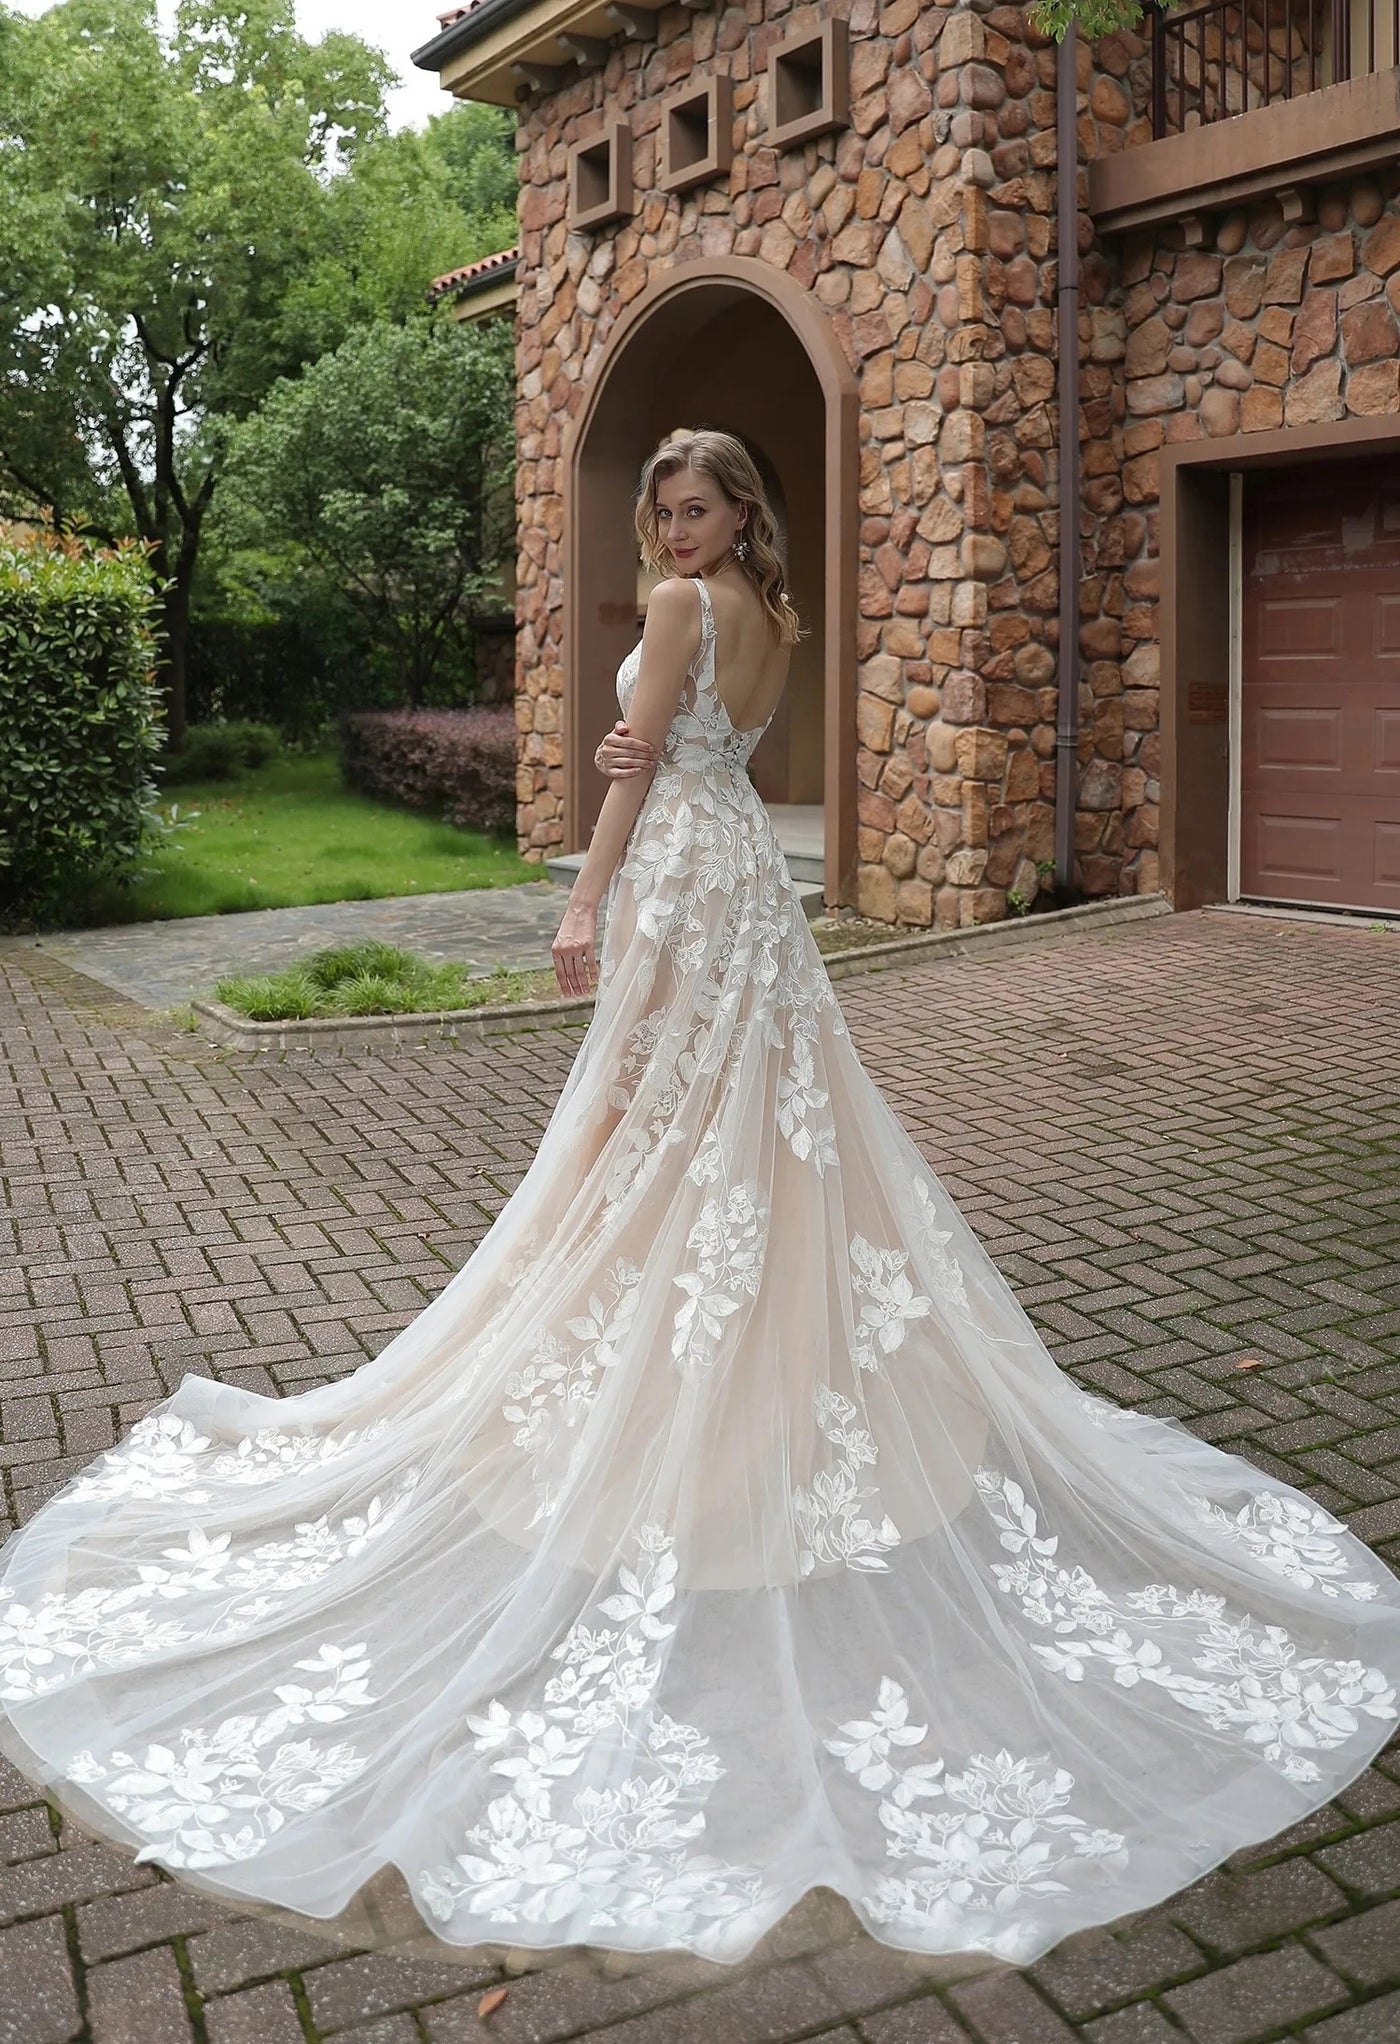 A woman in a Bergamot Bridal Luxurious Floral Lace A-Line Wedding Dress With Sheer Train standing in front of a house.